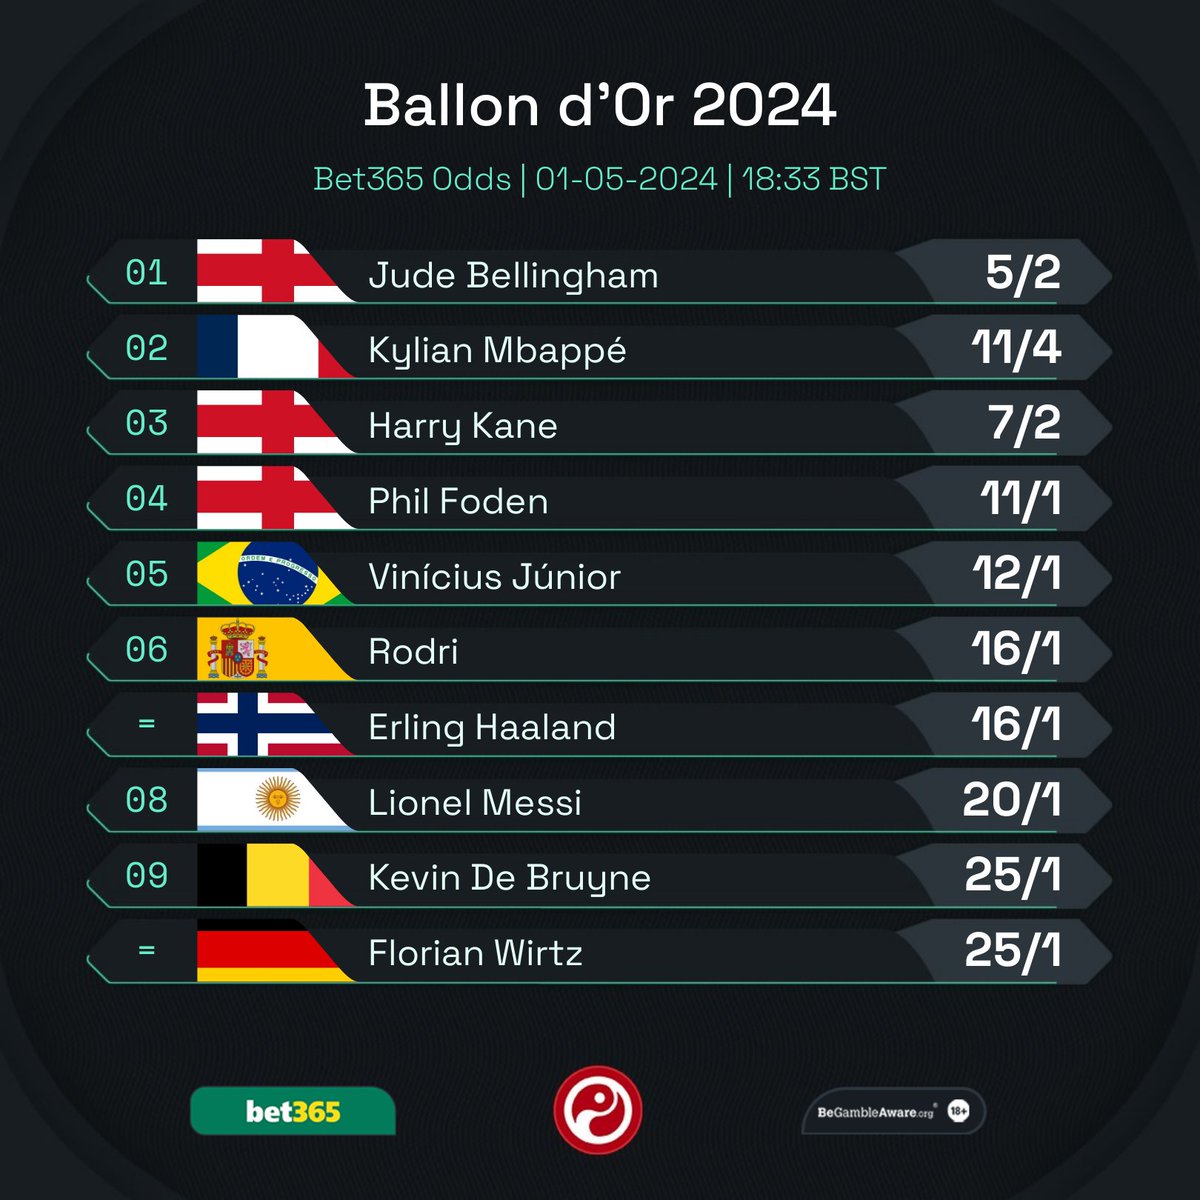 Implied probability of winning the Ballon d'Or based on @bet365 odds:

◉ 28.6% - Jude Bellingham
◎ 26.4% - Kylian Mbappé
◎ 22.2% - Harry Kane
◎ 8.3% - Phil Foden
◎ 7.7% - Vini Jr

Who is your pick? 🌕

18+ GambleAware #Ad